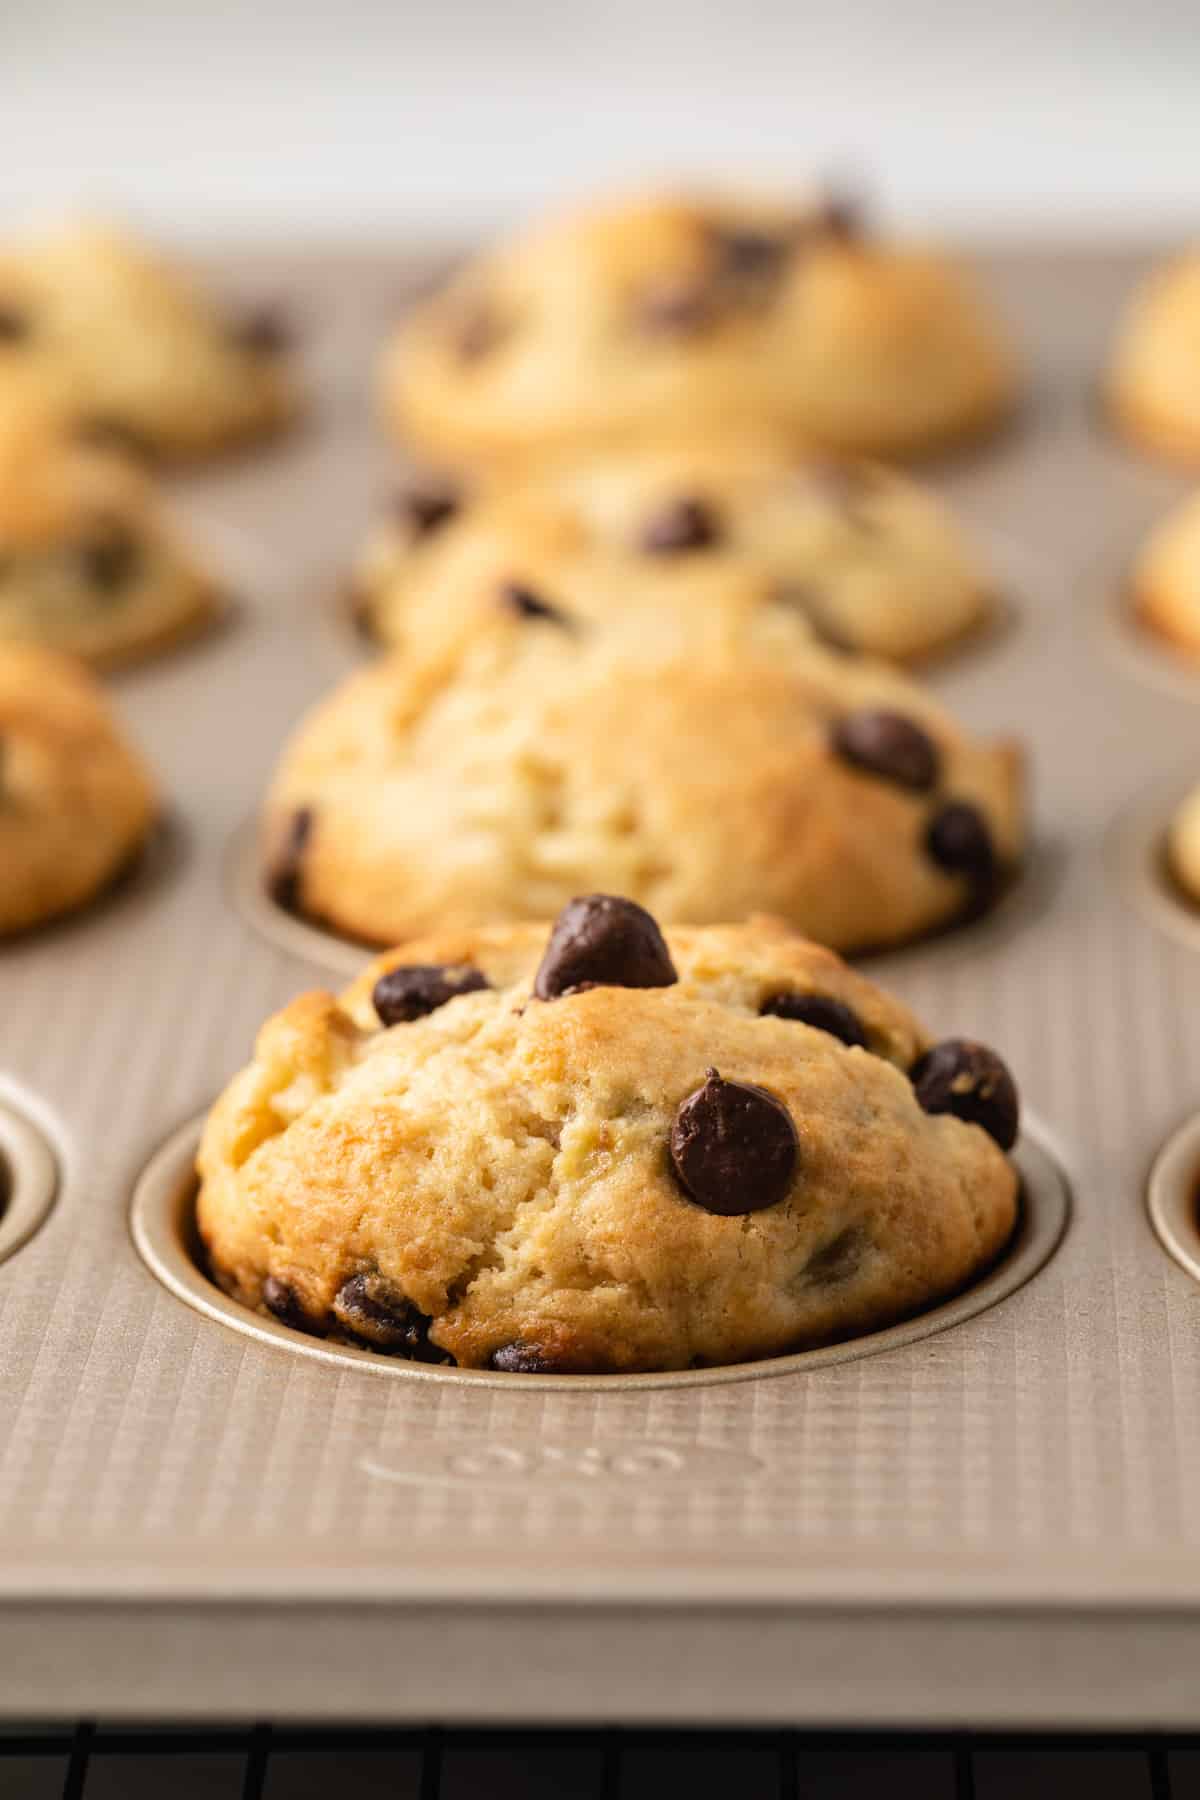 Side view of banana chocolate chip muffins.